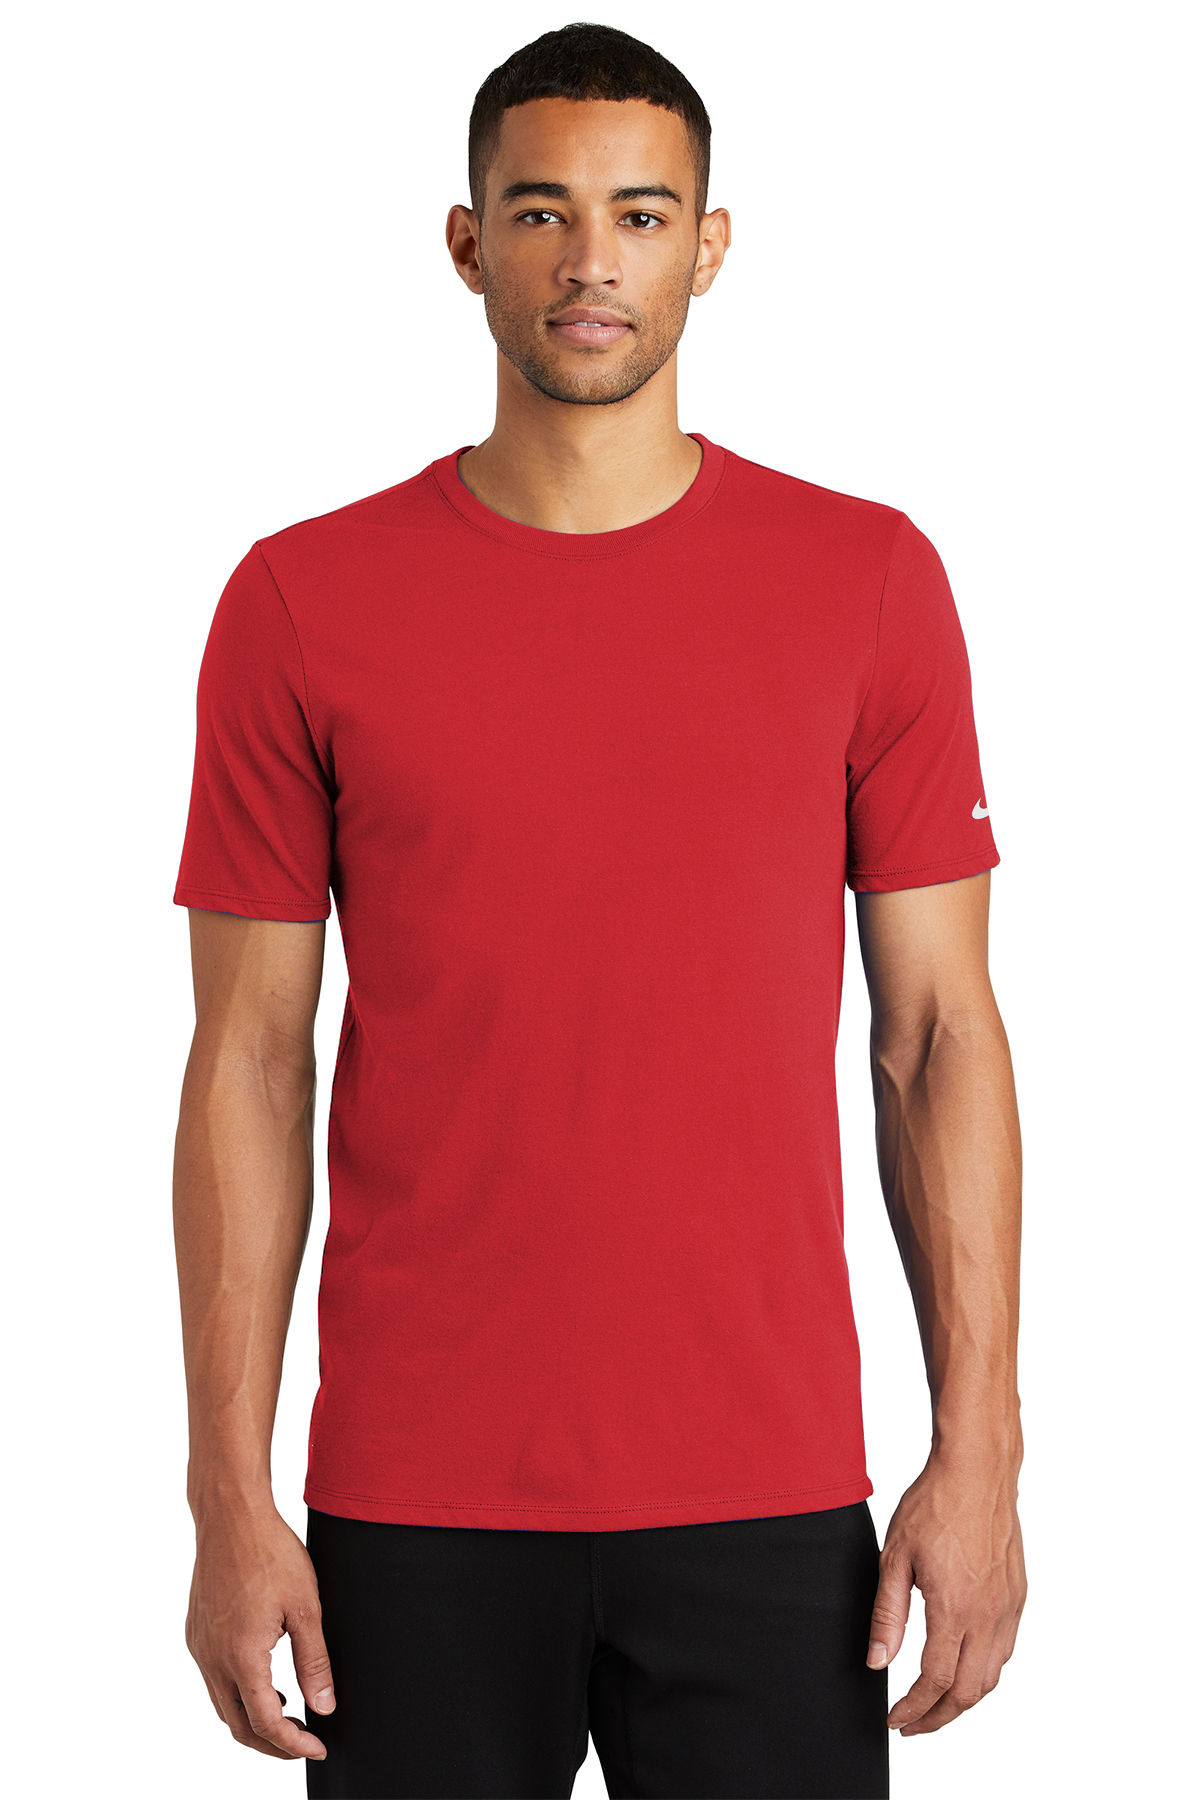 eksistens kode munching Nike Dri-FIT Cotton/Poly Tee | Product | Company Casuals